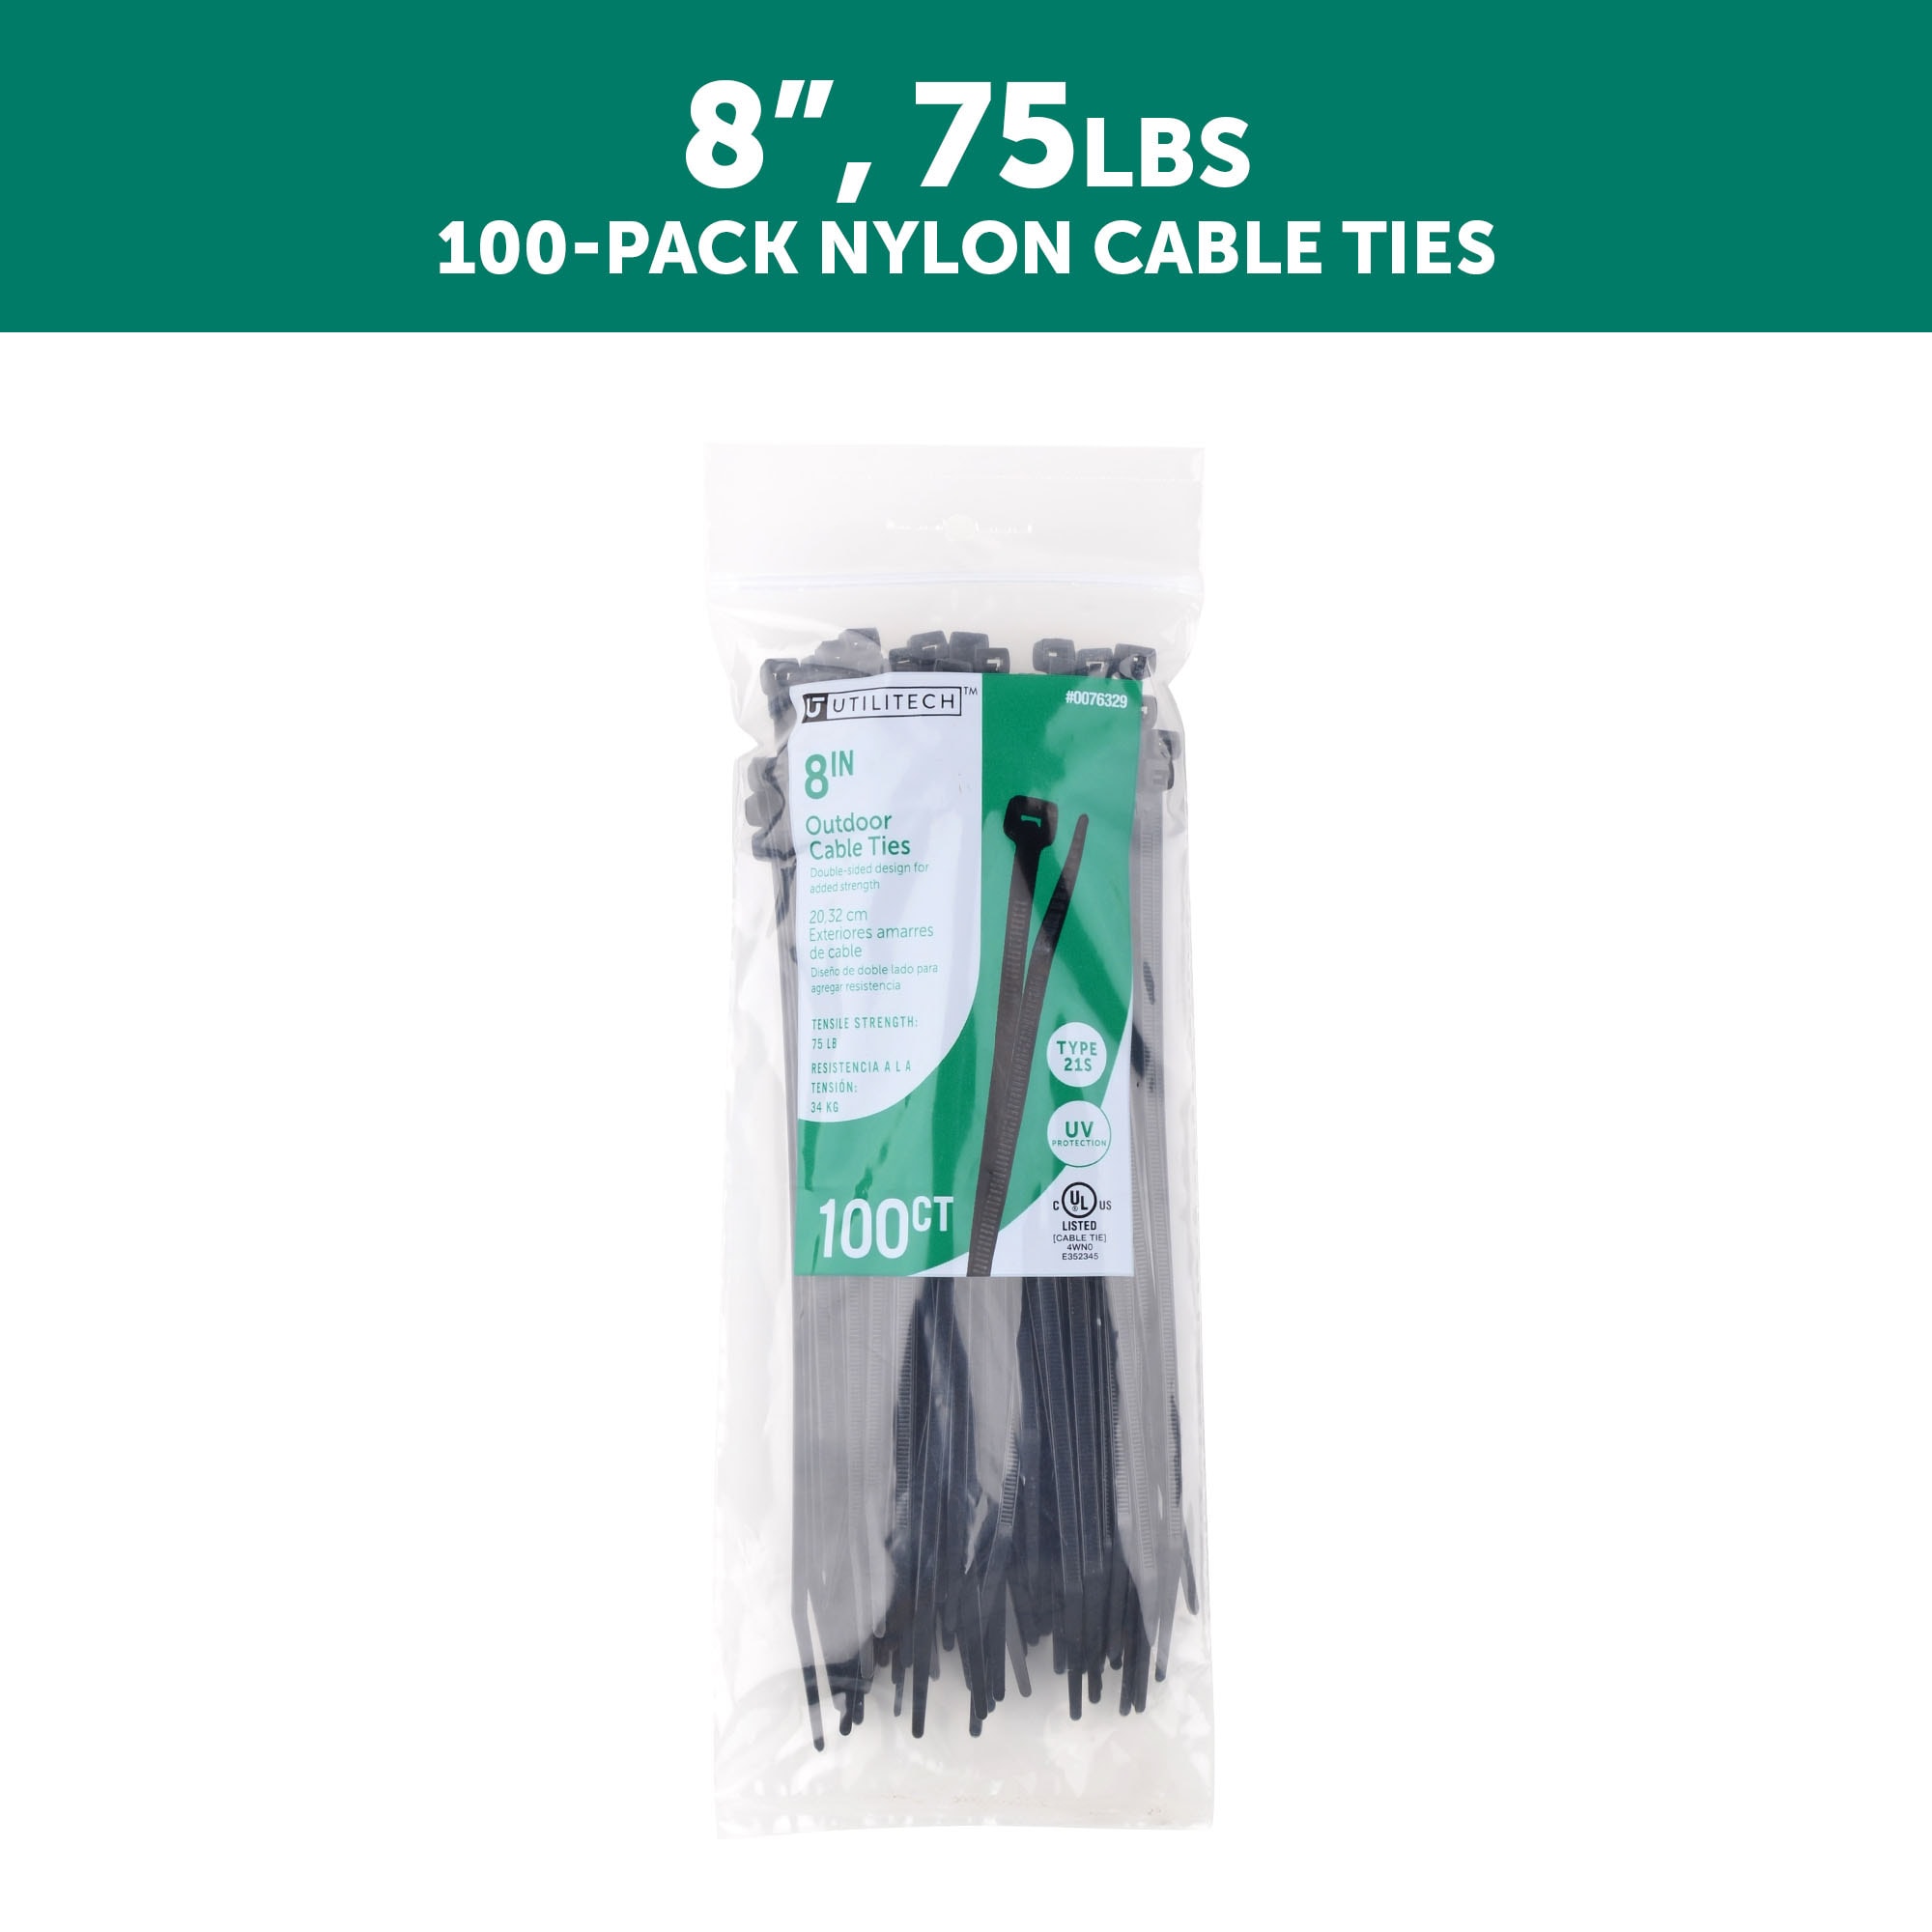 Cable Zip Ties at Lowes.com